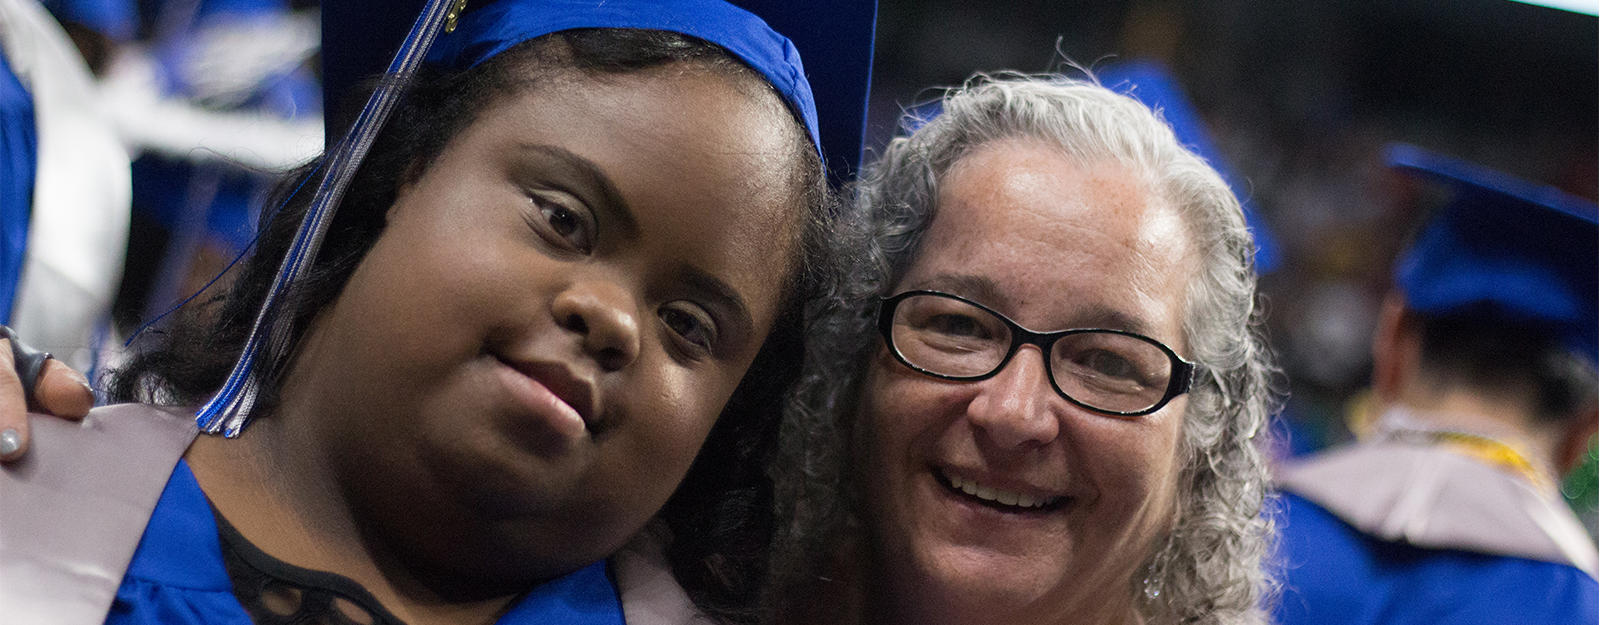 Special Education student smiling for a picture with a staff member during graduation.